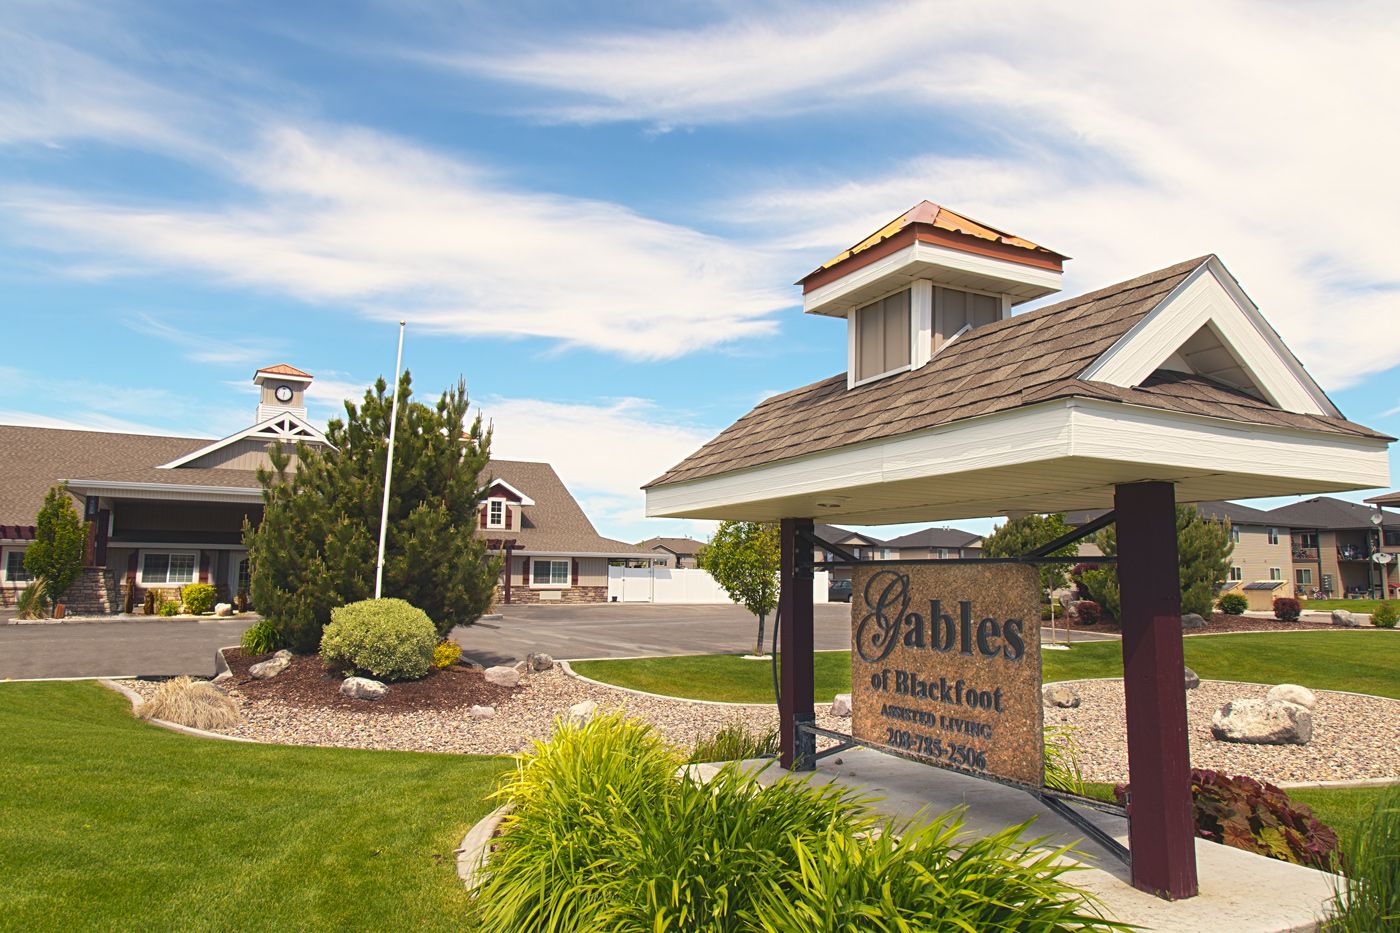 Gables Of Blackfoot Assisted Living II 1